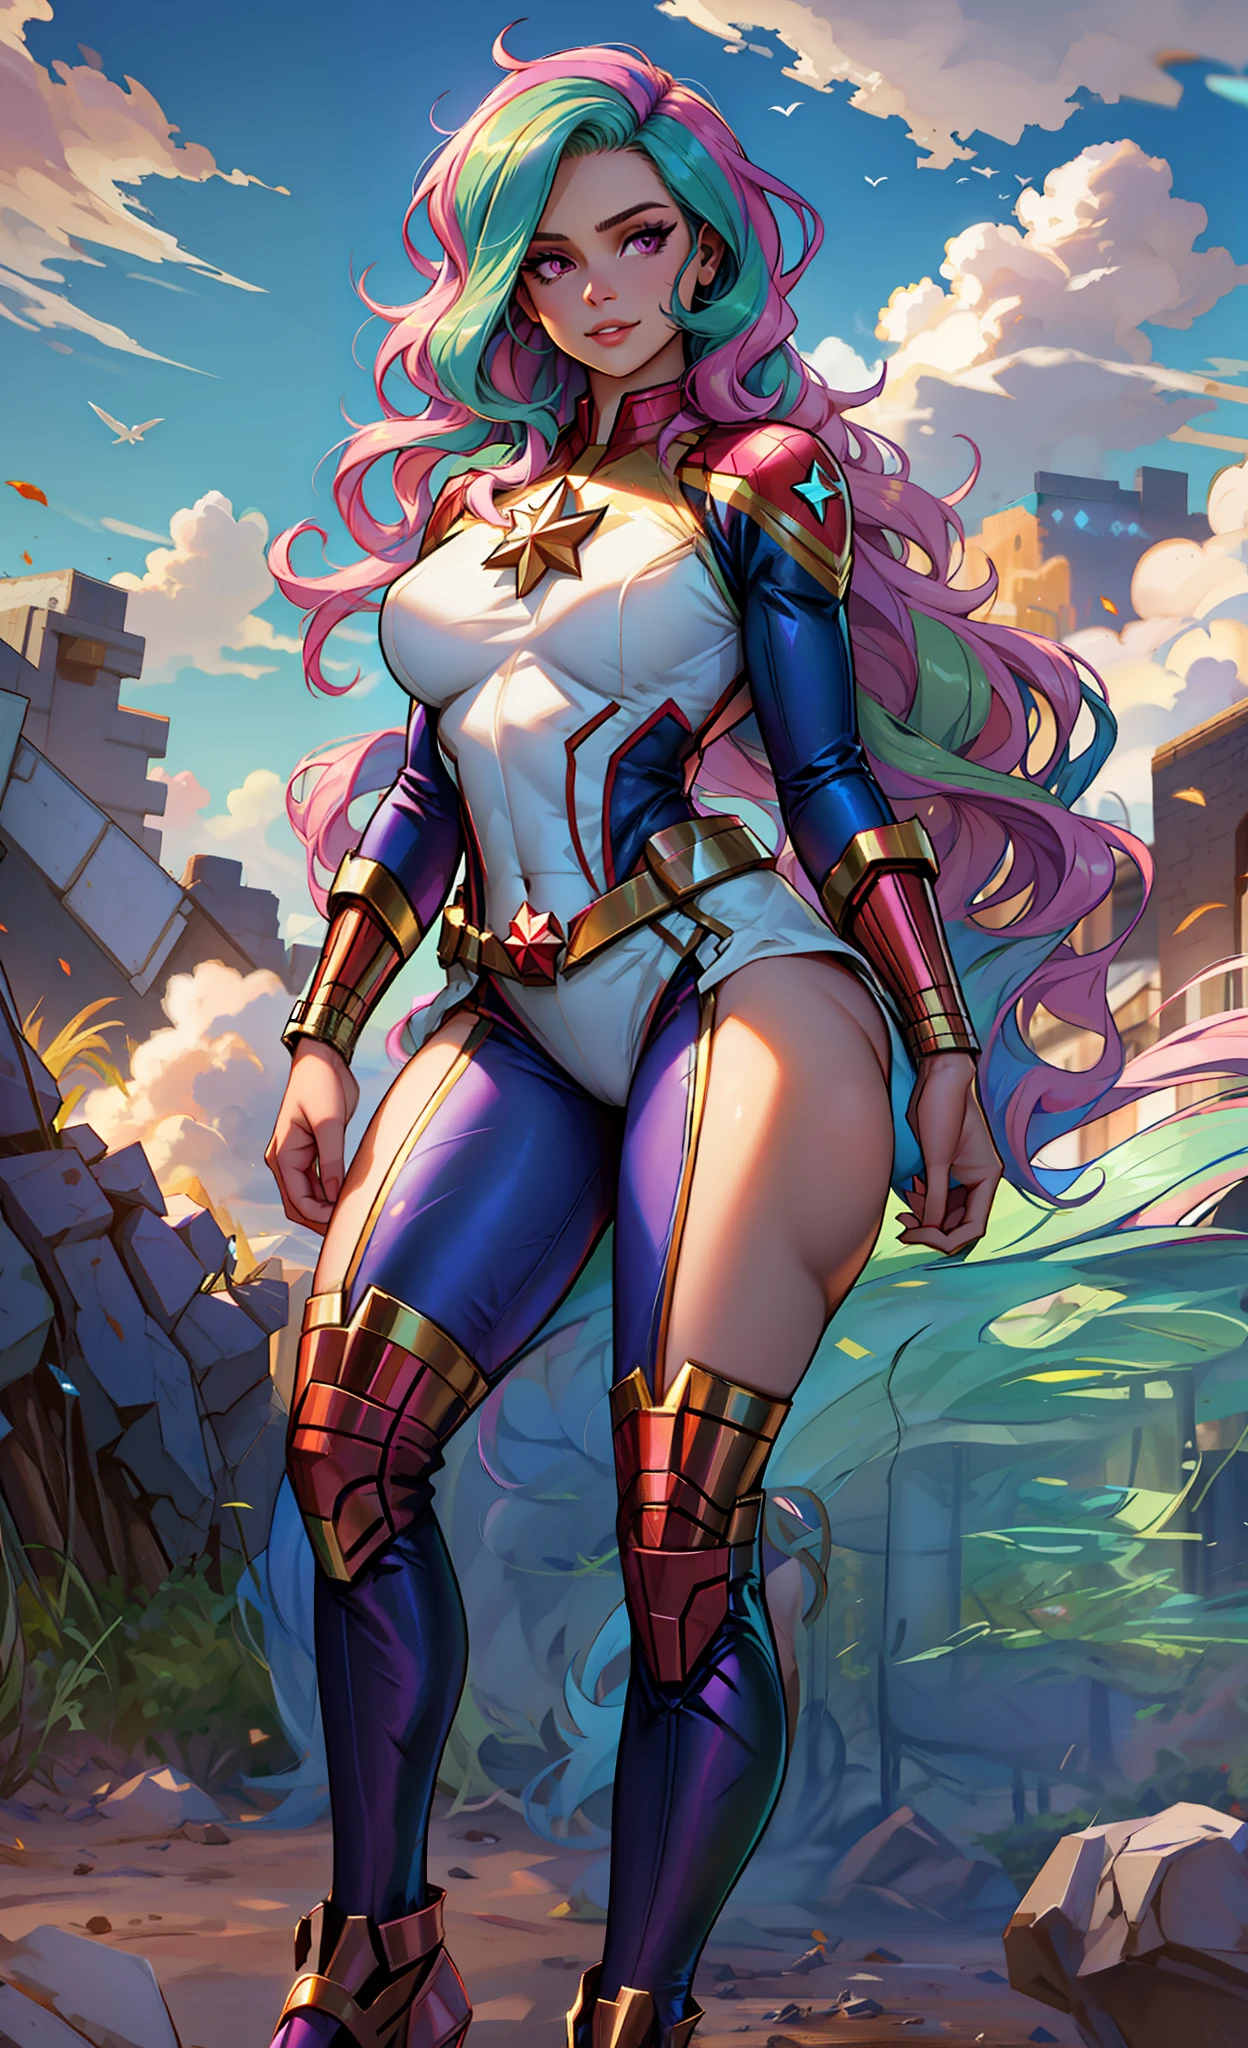 Princess celestia, Huge-breasts, Lush breasts, Elastic breasts, hairlong, Luxurious hairstyle, In the costume of Captain Marvel, in the sky, superhero, in full height, Evil Look, Magic, Flight beam, beste-Qualit, Very detailed, 8K quality, in full height, naked ass, No clothes, naked breasts, You can see the nipples, naked torso, Completely naked, Bare , nudism, naked vagina